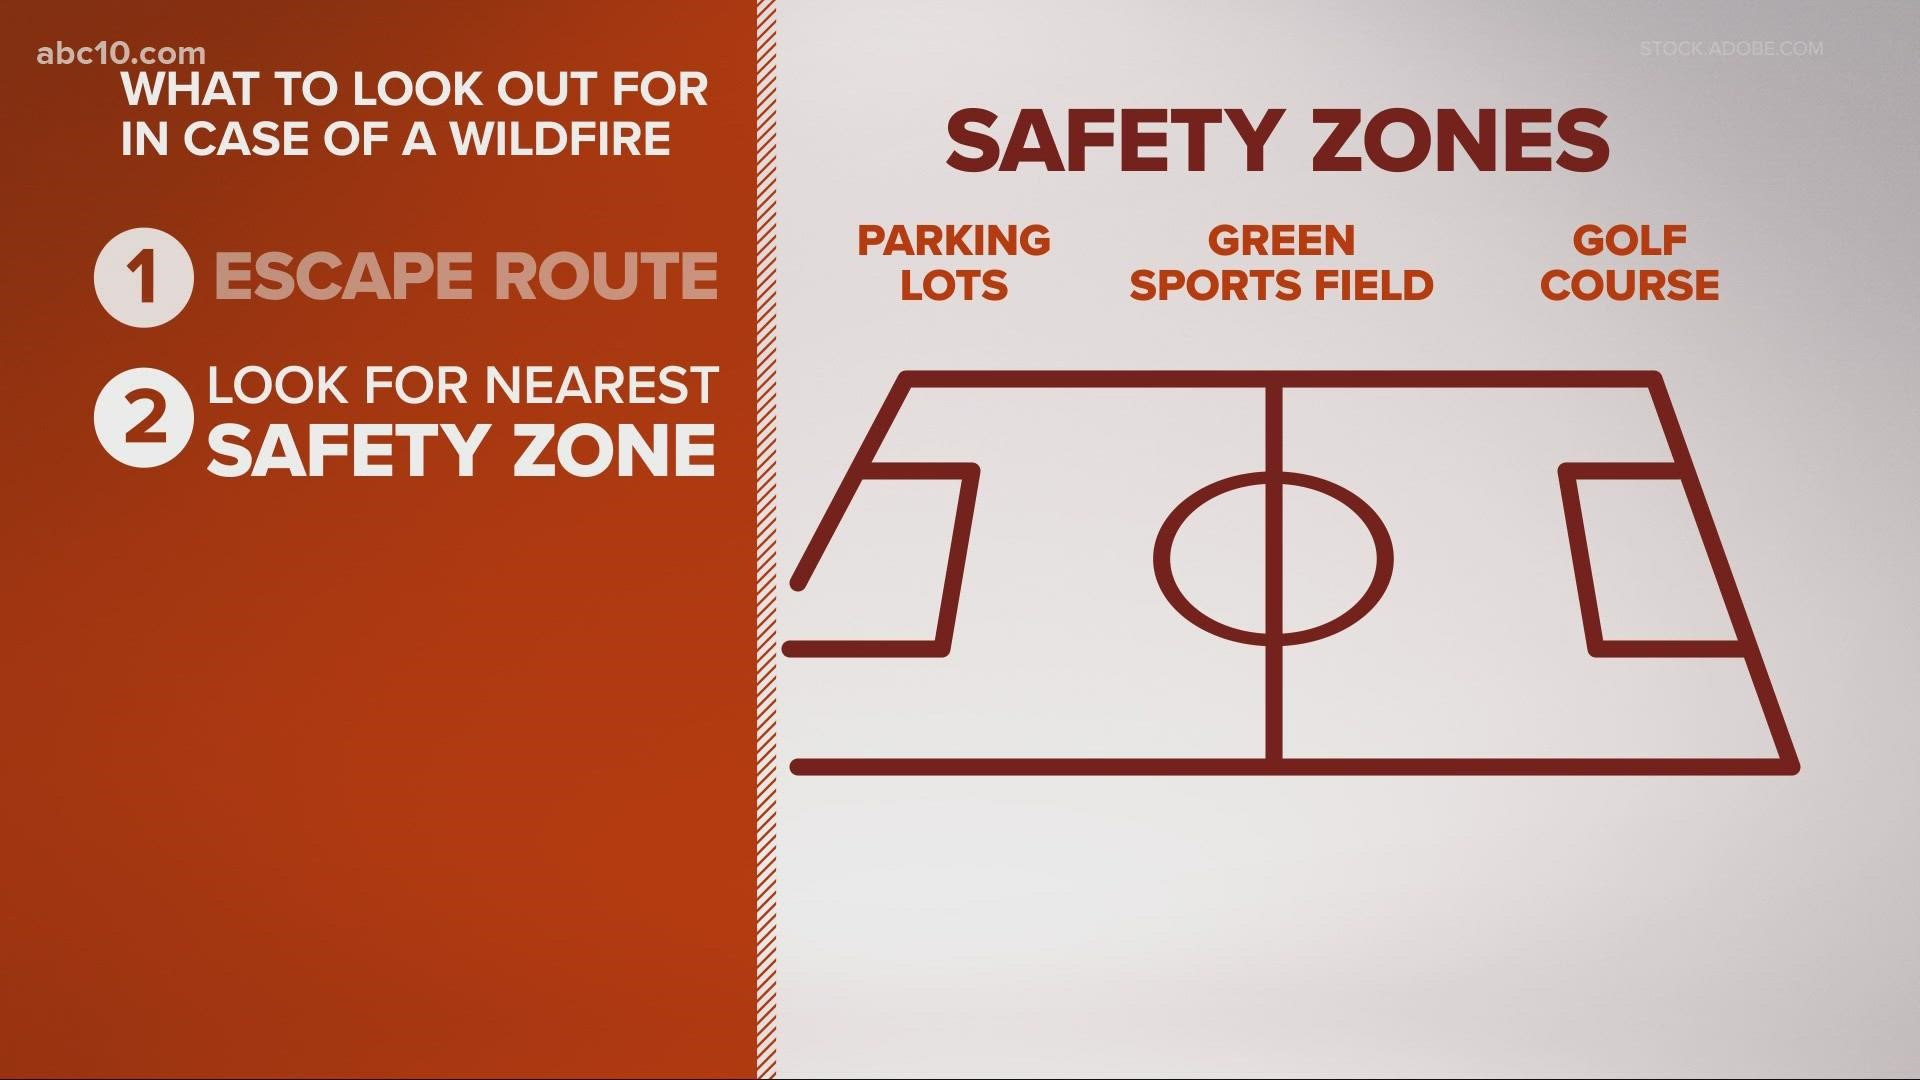 Escape routes and safety zones during fires.